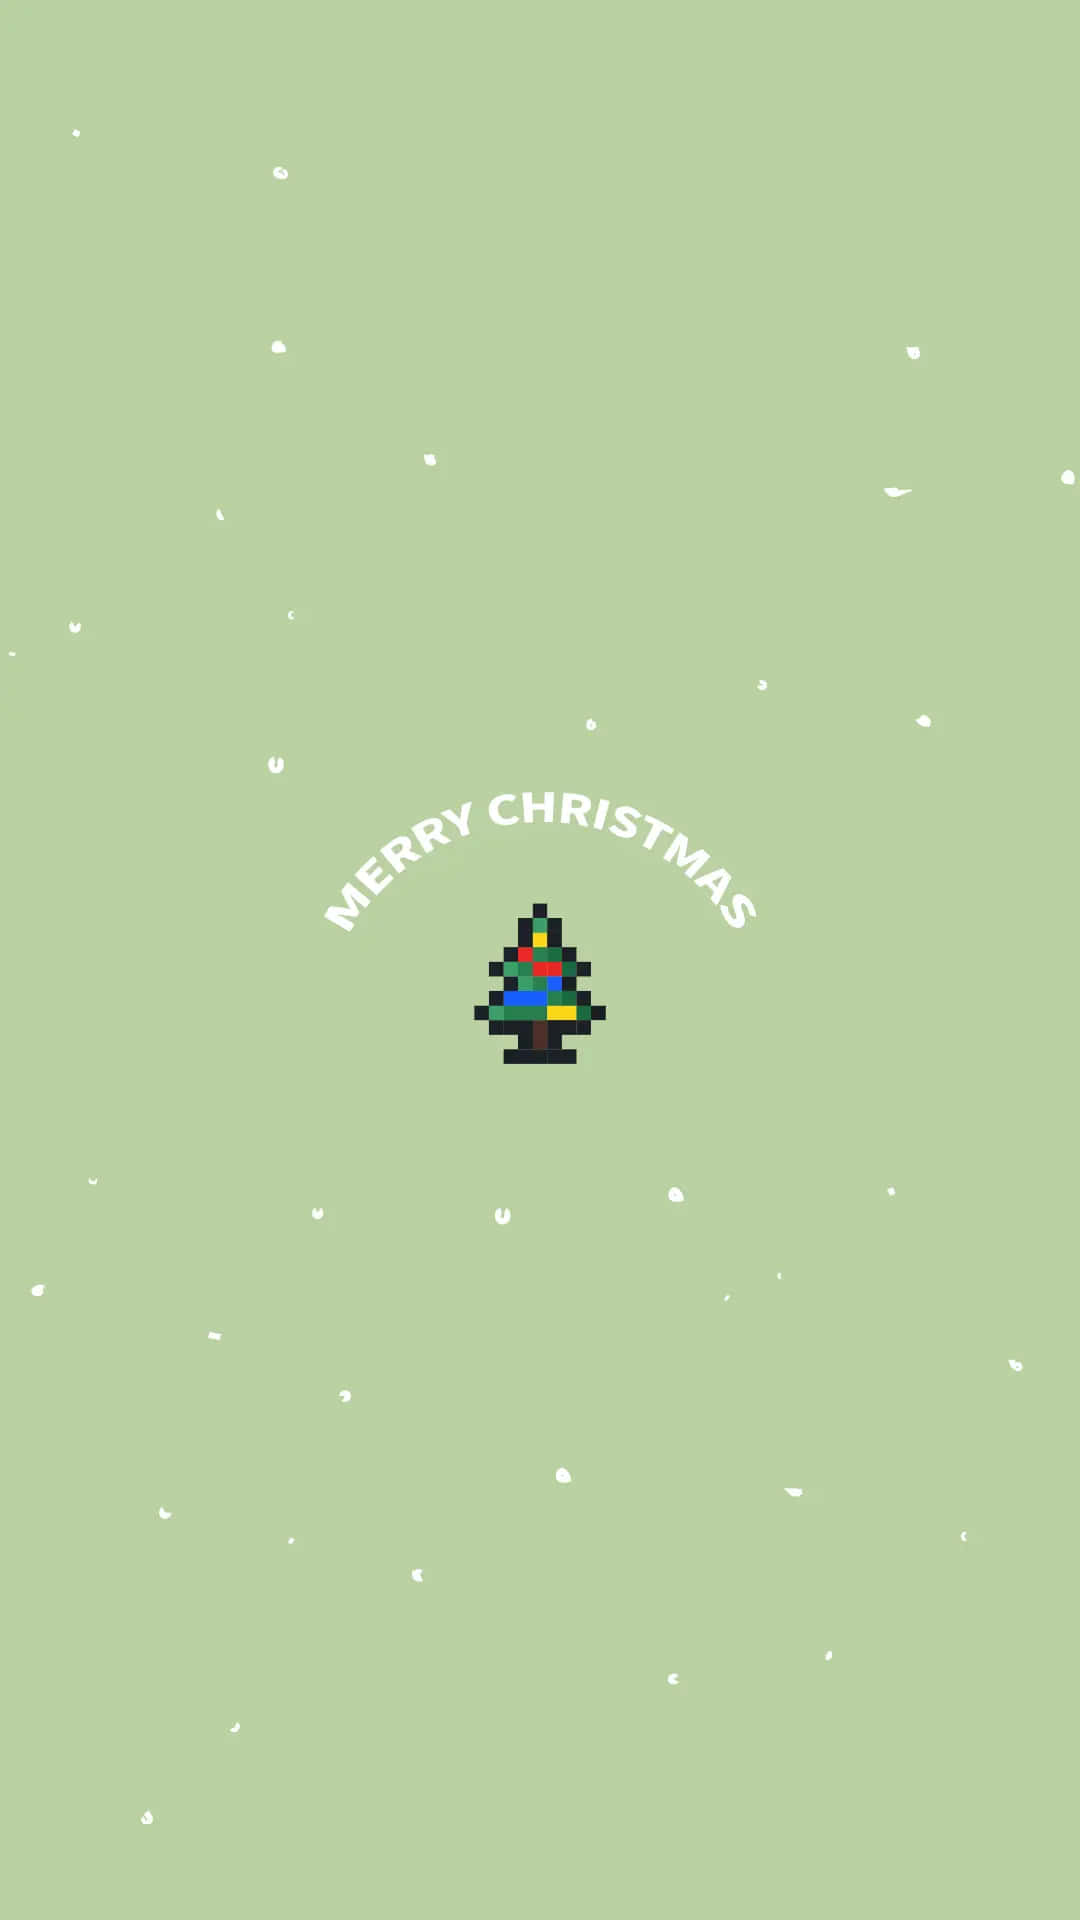 Celebrate the Holidays with a Cute Christmas Tree Wallpaper